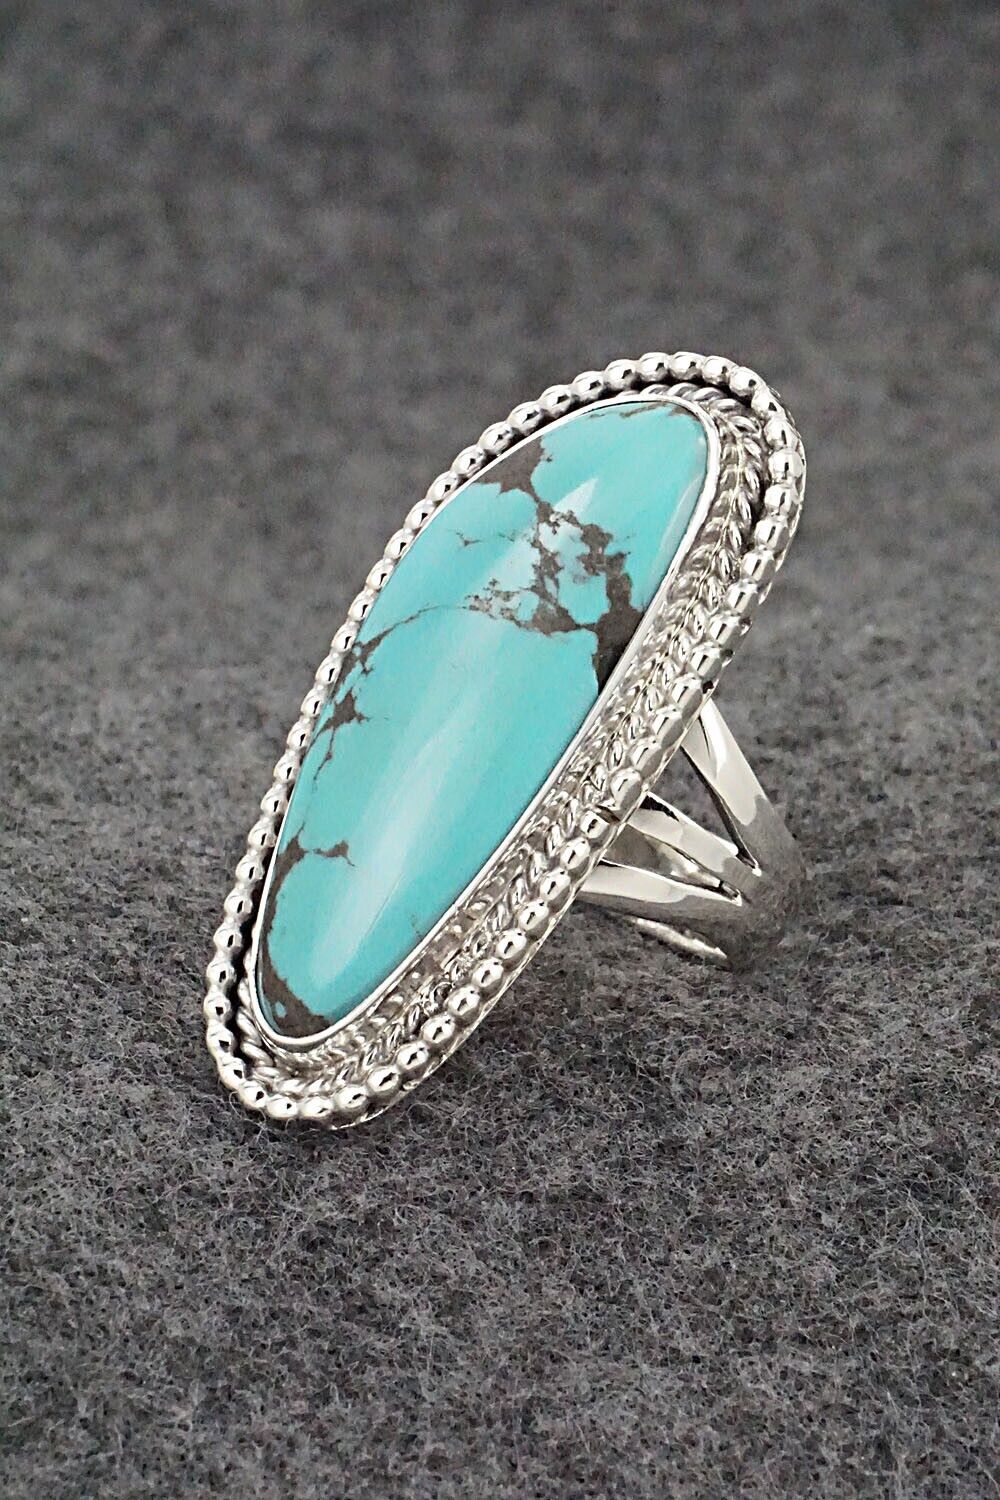 Turquoise & Sterling Silver Ring - Andrew Vandever - Size 7.5